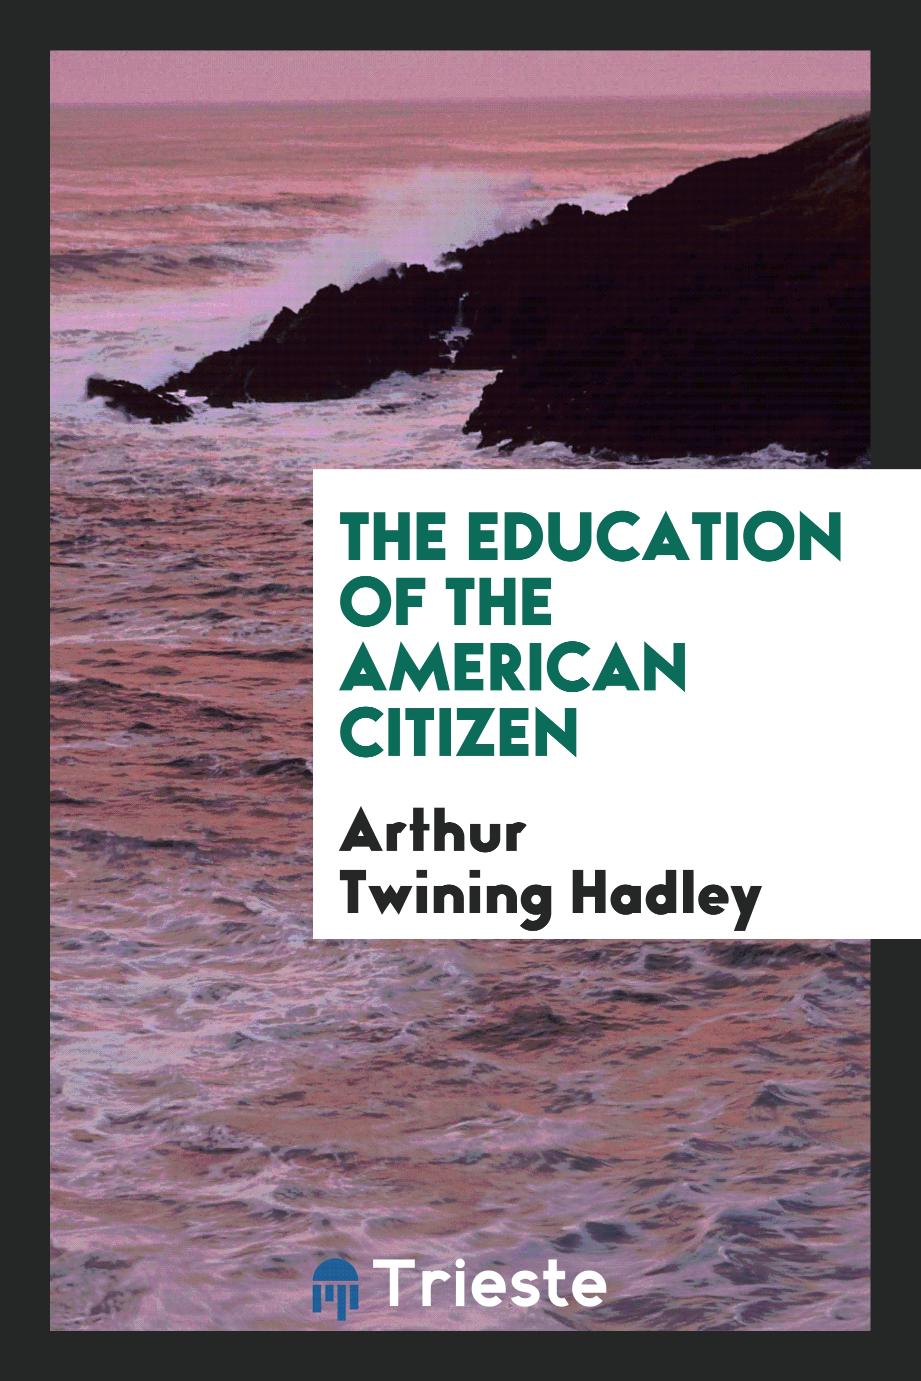 The education of the American citizen